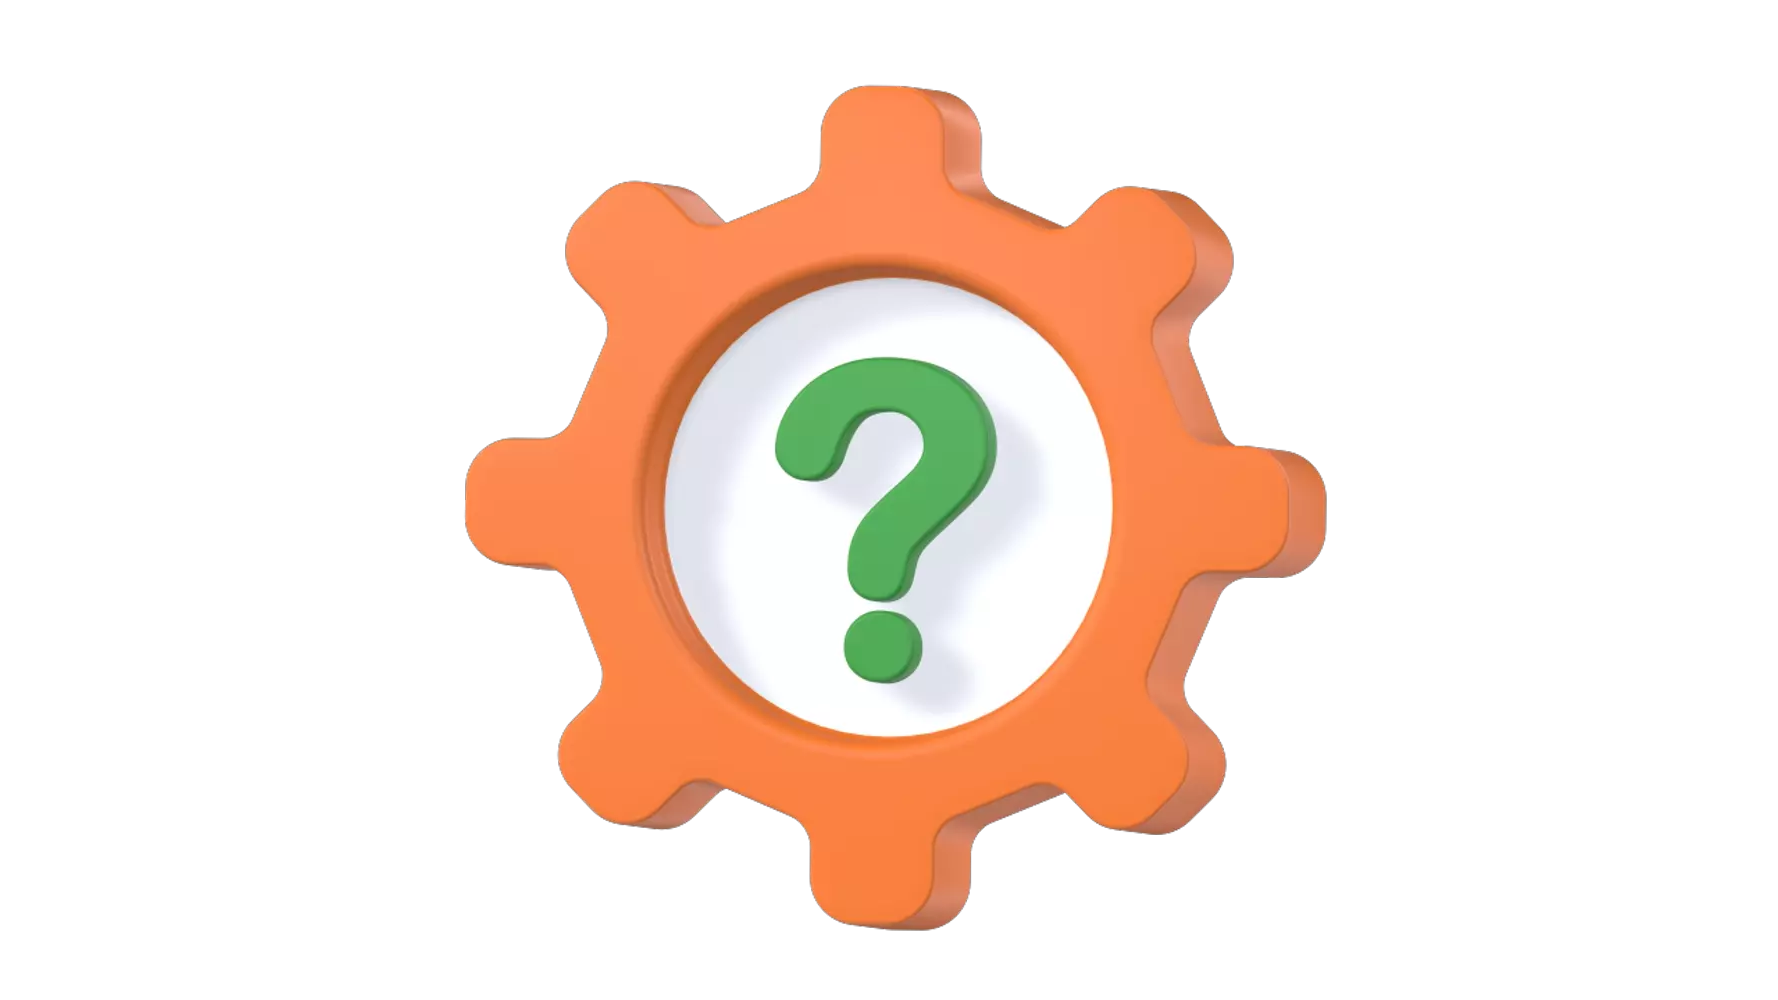 Gear With Question Mark 3D Graphic